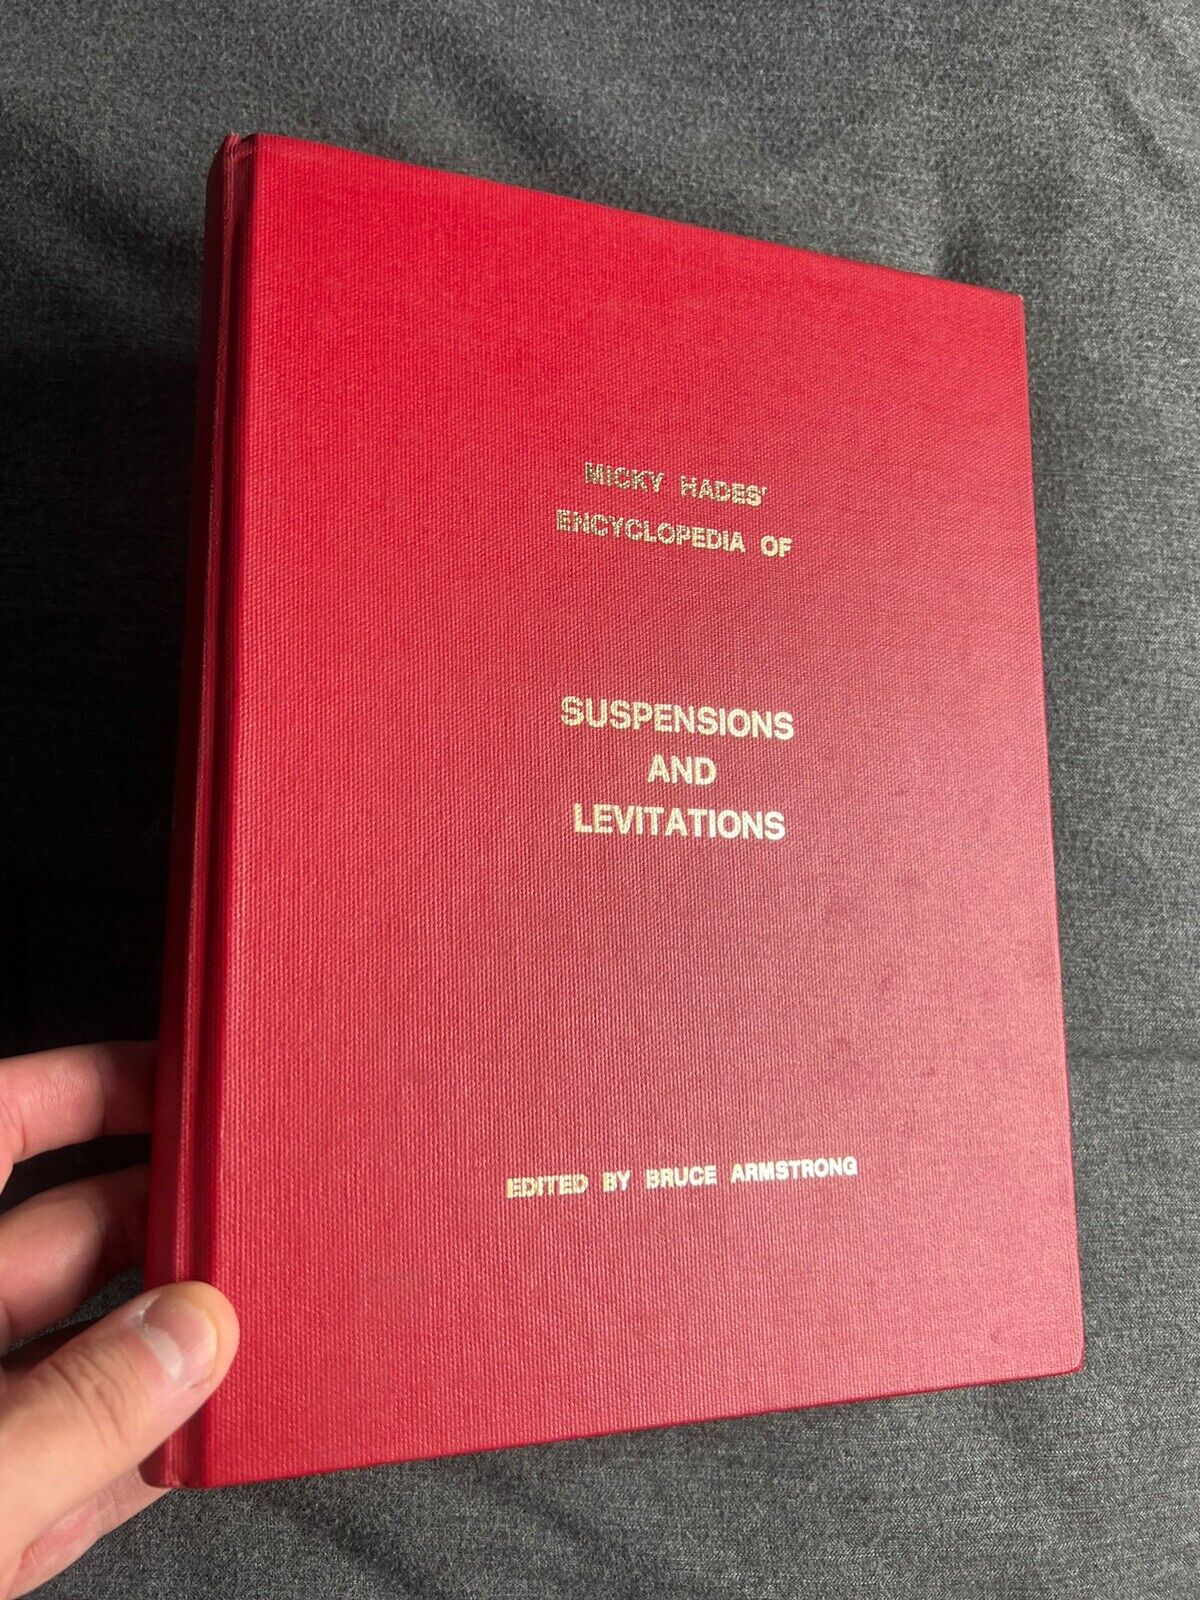 🔥Micky Hades’ Encyclopedia of Suspensions And Levitations RARE Collectable🔥